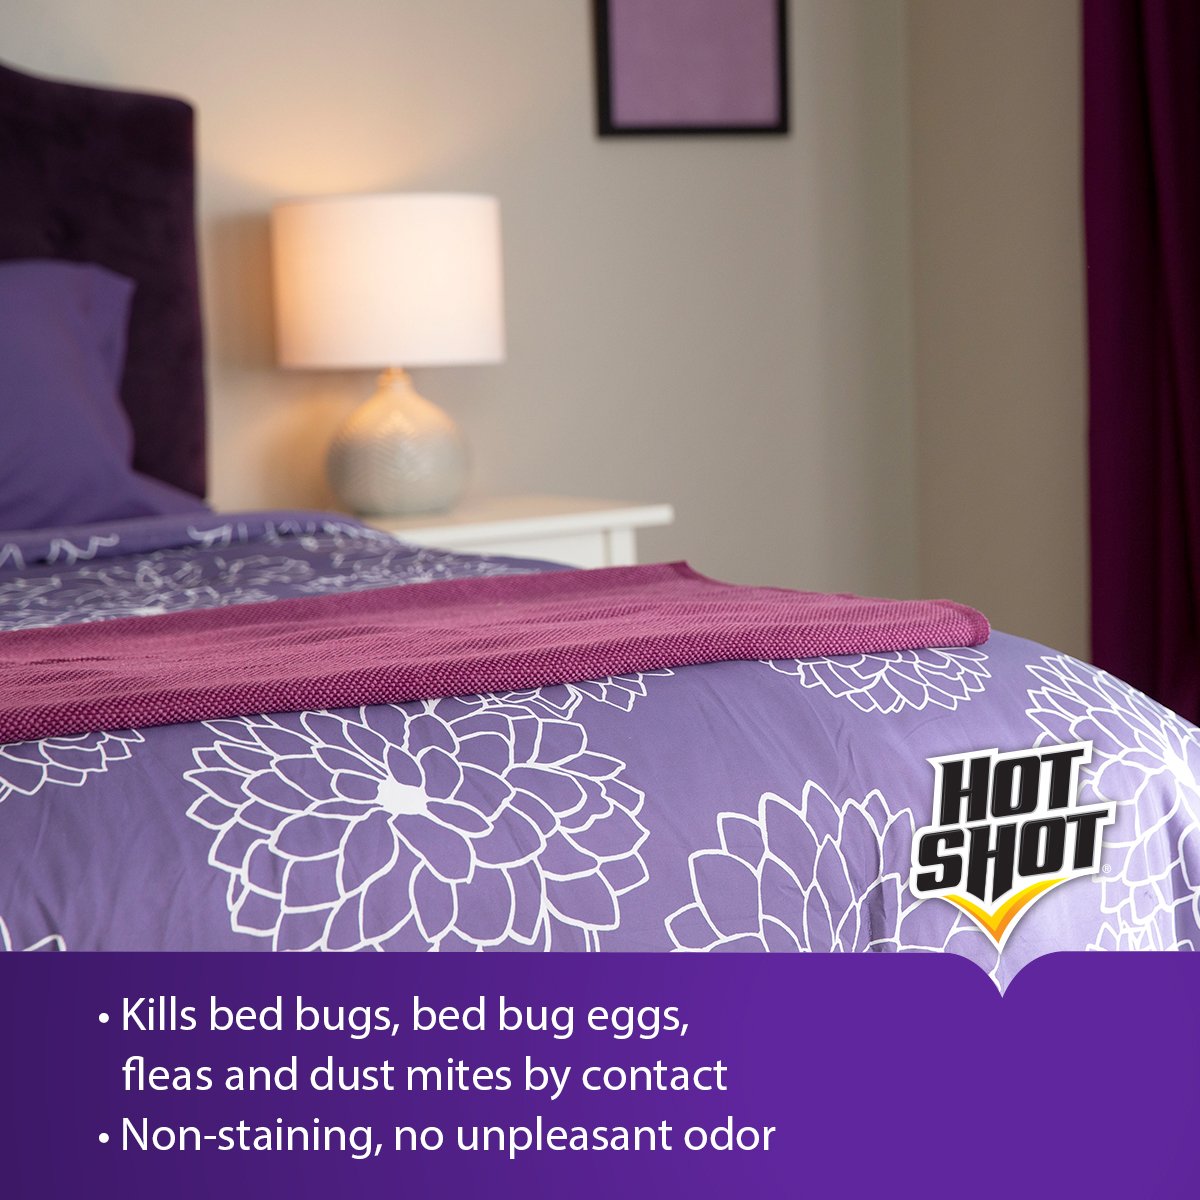 hot shot bed bug spray side effects